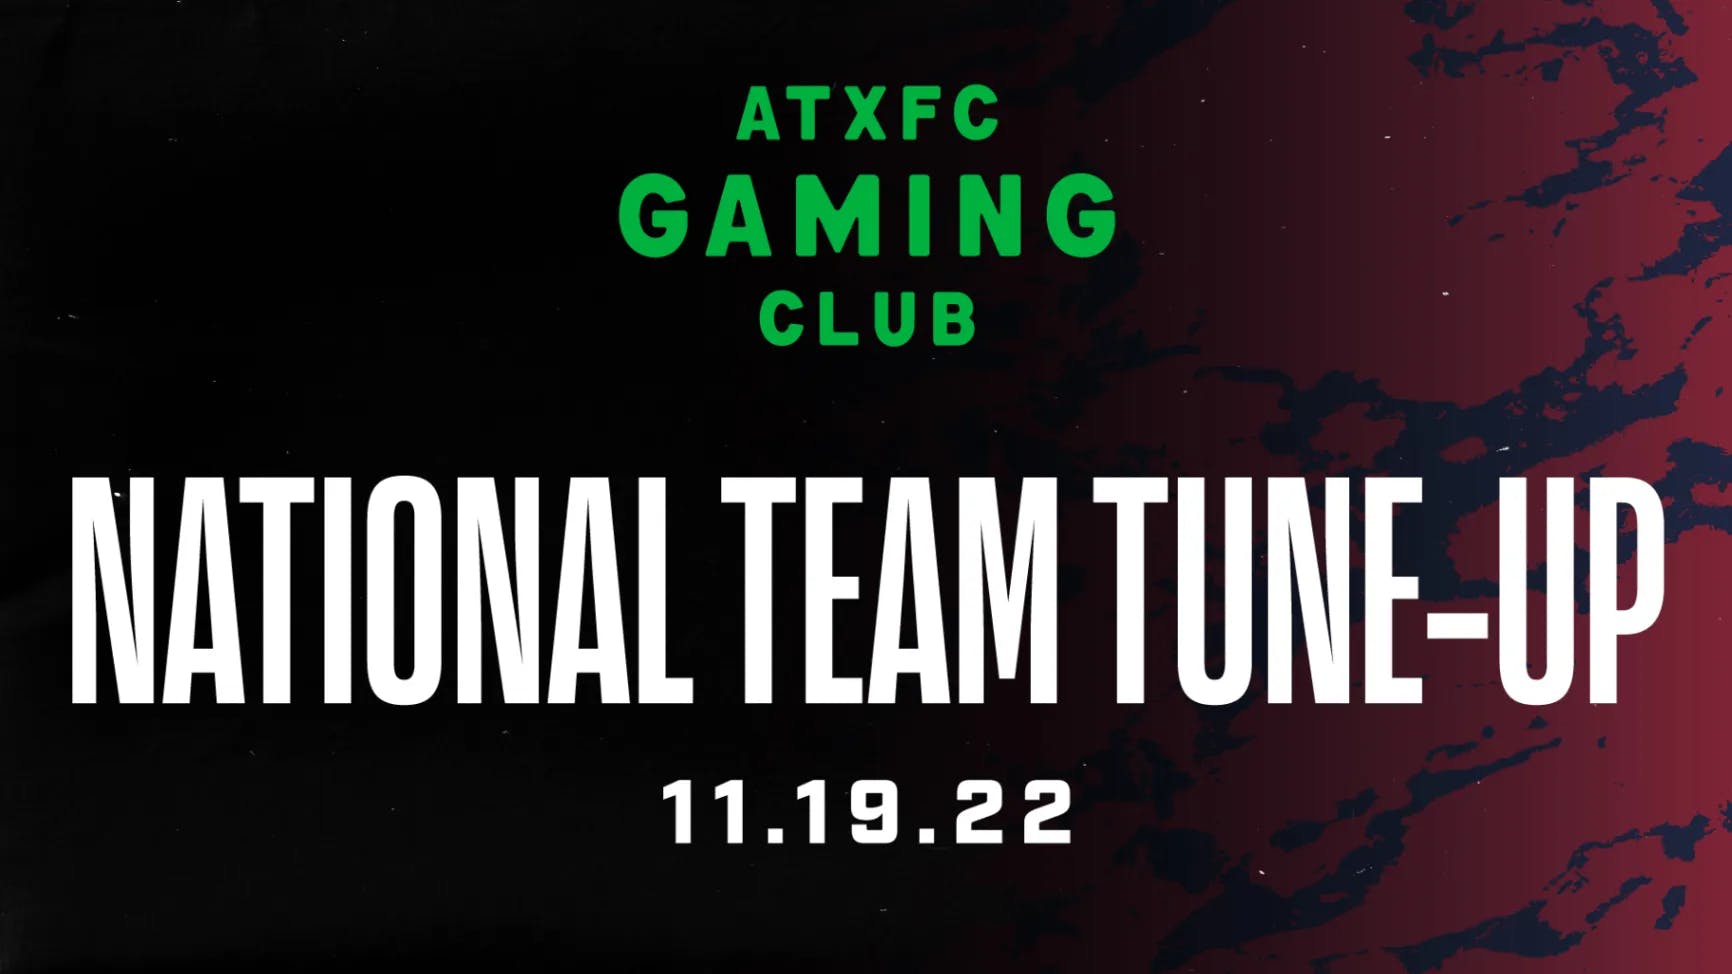 ATXFC Gaming Club National Team Tune-up (PS4/XB1)